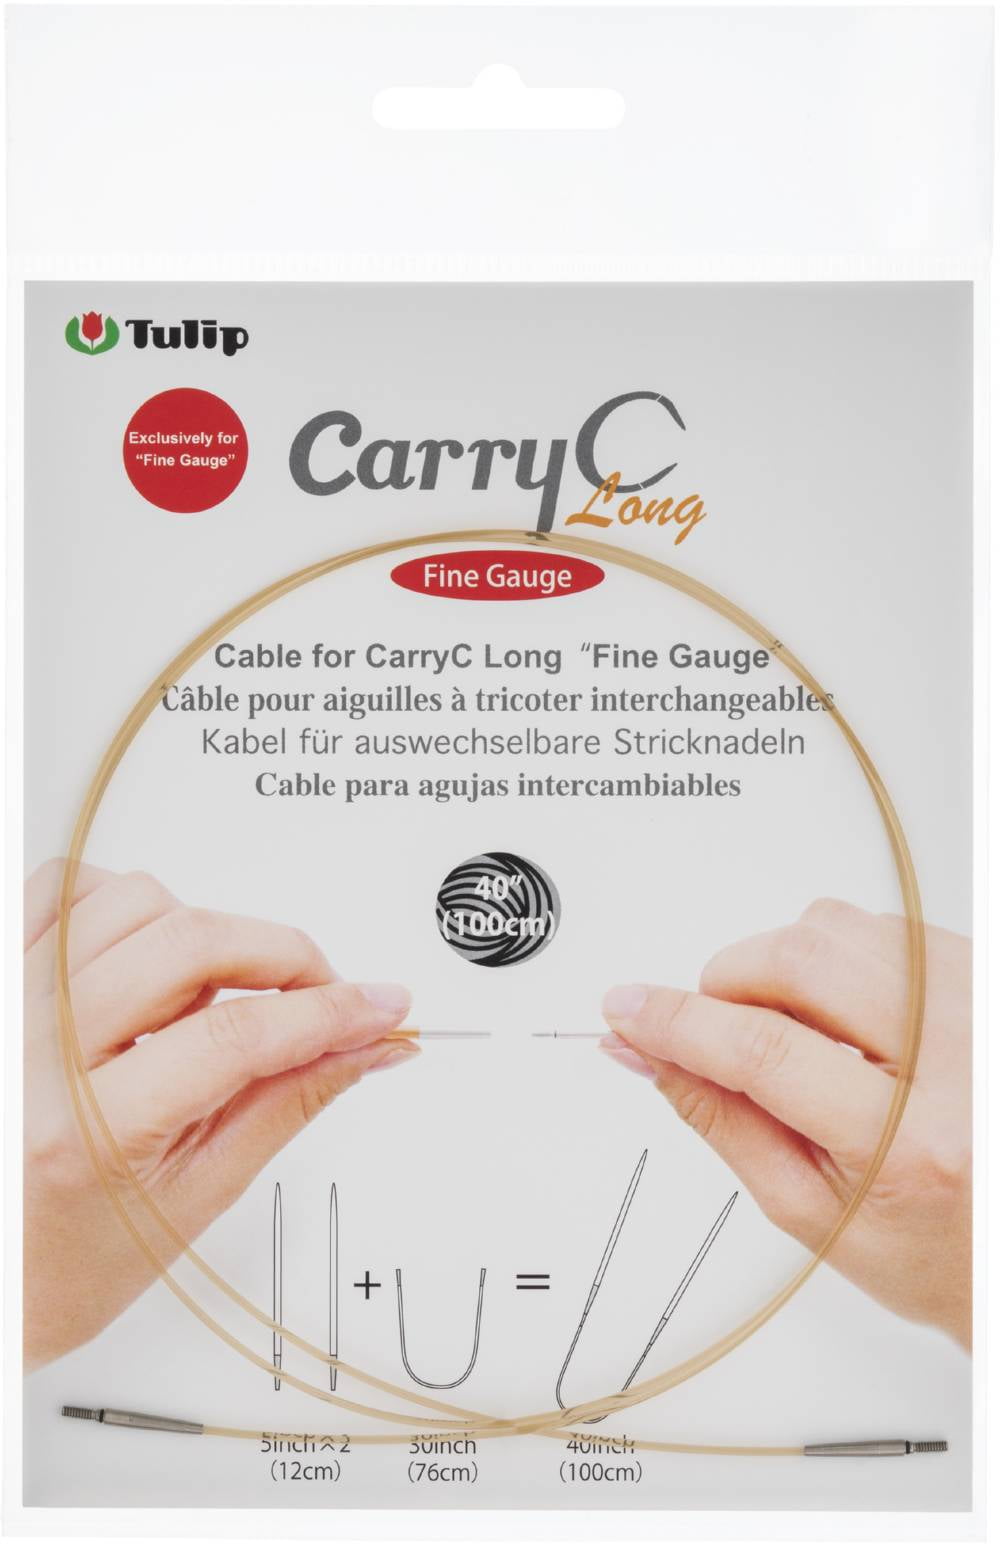 Tulip Carry C Intchg Cords For Long Fine Gauge Bamboo Needle-40"